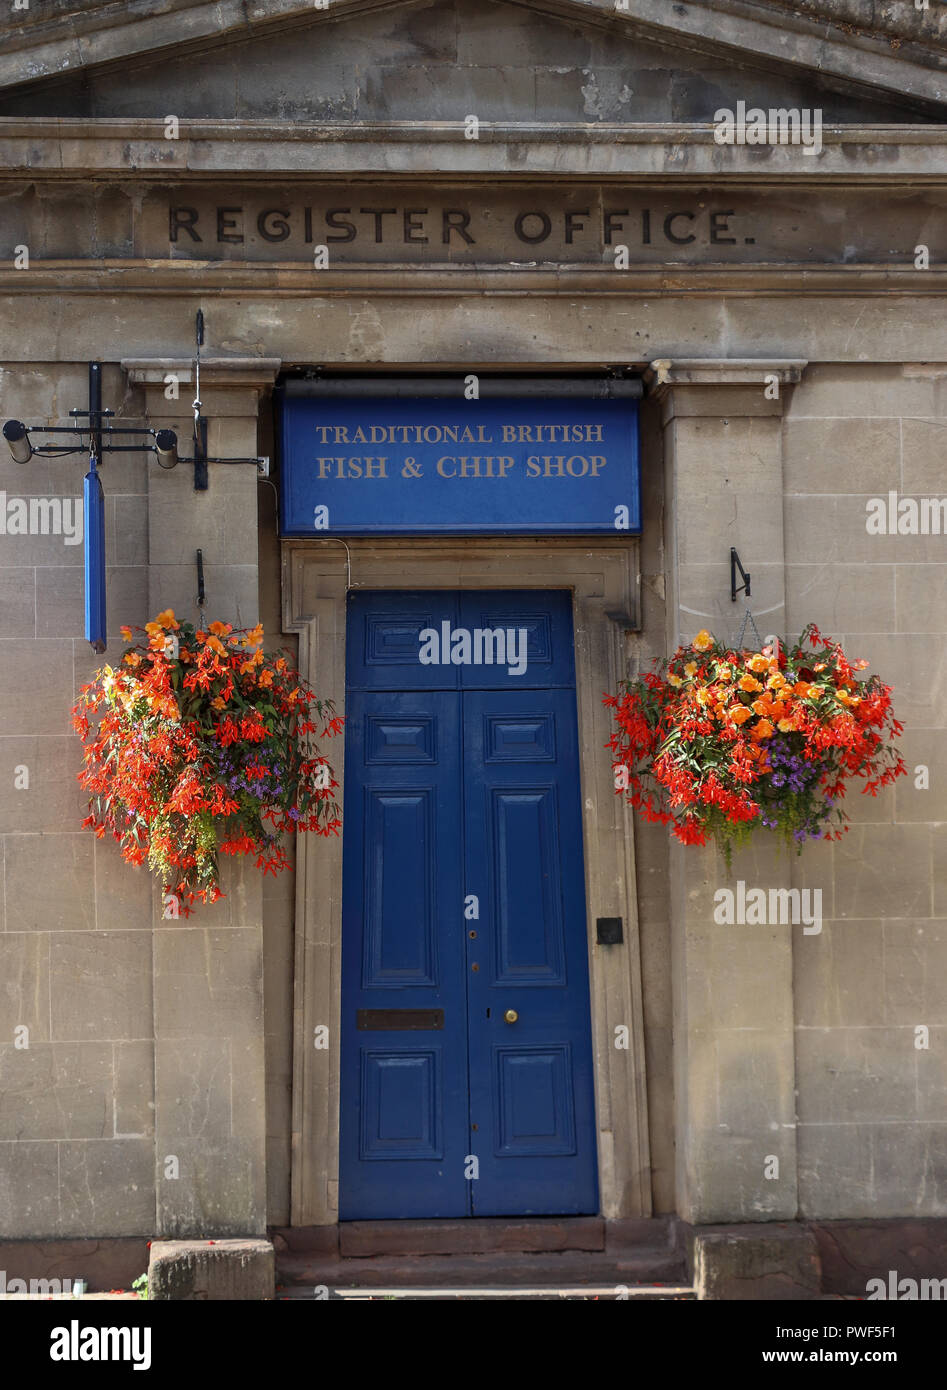 An old Register Office in Thornbury, Gloucestershire, UK is now a fish and chips shop with a bright blue door and two colorful hanging flower baskets Stock Photo